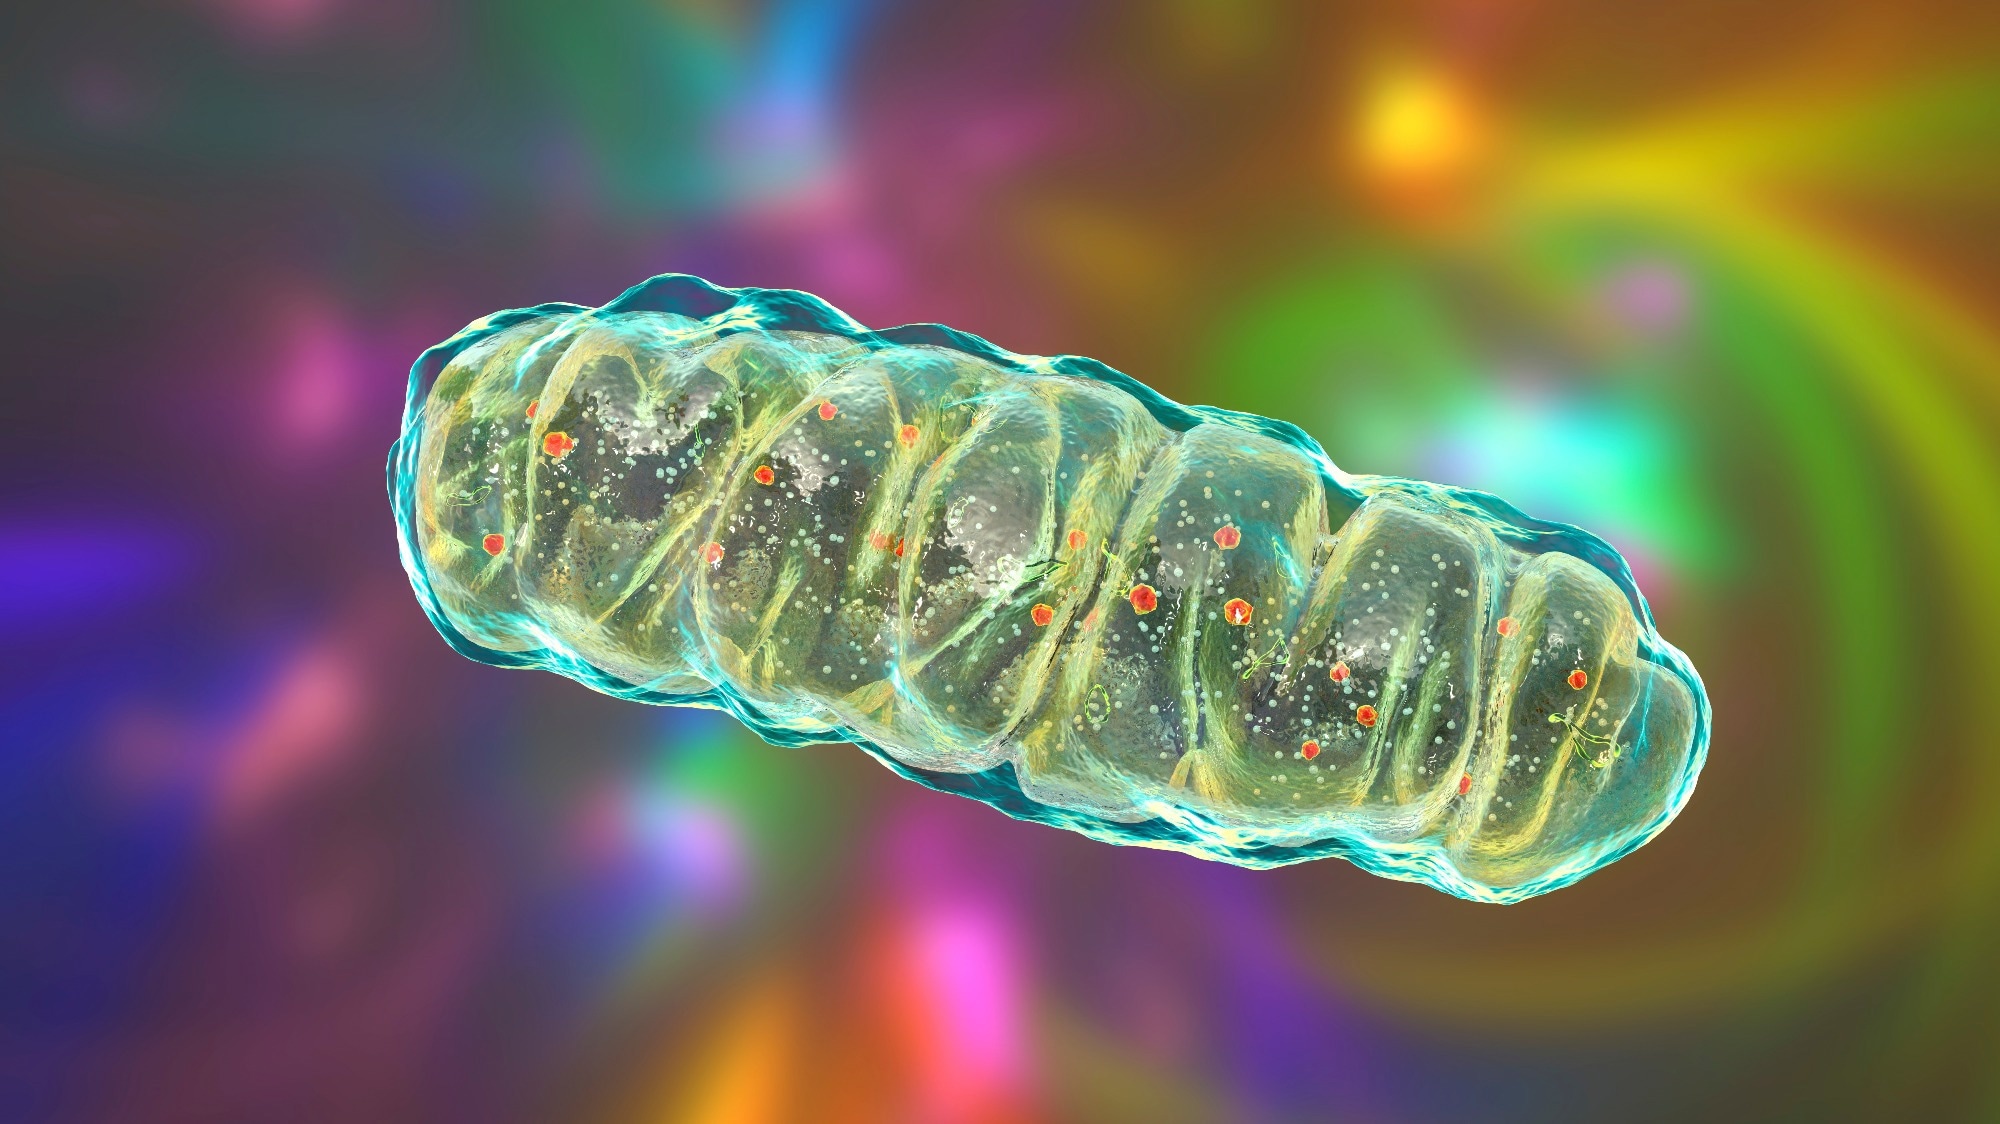 Study: A blood-based marker of mitochondrial DNA damage in Parkinson’s disease. Image Credit: Kateryna Kon / Shutterstock.com